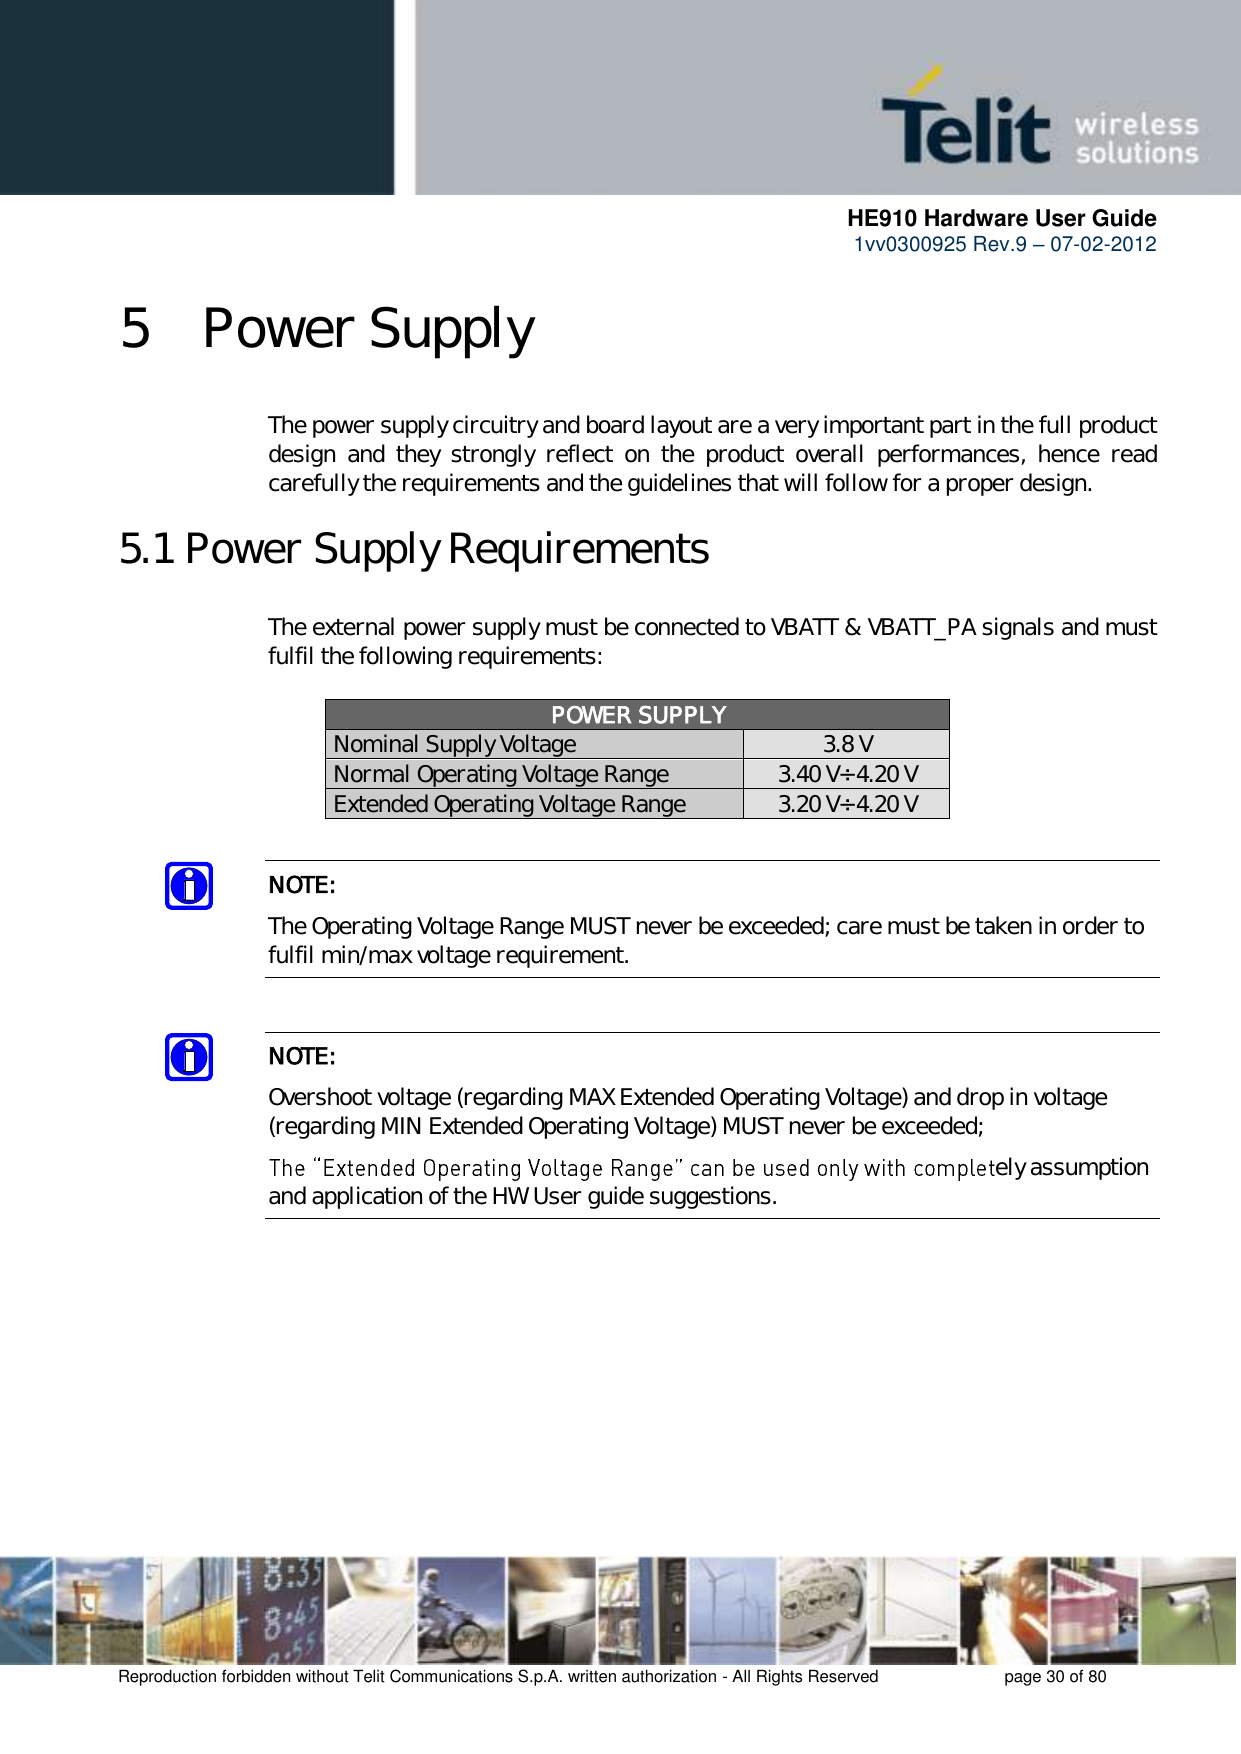      HE910 Hardware User Guide 1vv0300925 Rev.9 – 07-02-2012    Reproduction forbidden without Telit Communications S.p.A. written authorization - All Rights Reserved    page 30 of 80  5 Power Supply The power supply circuitry and board layout are a very important part in the full product design  and  they  strongly  reflect  on  the  product  overall  performances,  hence  read carefully the requirements and the guidelines that will follow for a proper design. 5.1 Power Supply Requirements The external power supply must be connected to VBATT &amp; VBATT_PA signals and must fulfil the following requirements:  POWER SUPPLY Nominal Supply Voltage 3.8 V Normal Operating Voltage Range 3.40 V÷ 4.20 V Extended Operating Voltage Range 3.20 V÷ 4.20 V  NOTE: The Operating Voltage Range MUST never be exceeded; care must be taken in order to fulfil min/max voltage requirement.  NOTE: Overshoot voltage (regarding MAX Extended Operating Voltage) and drop in voltage (regarding MIN Extended Operating Voltage) MUST never be exceeded;  ely assumption and application of the HW User guide suggestions.  